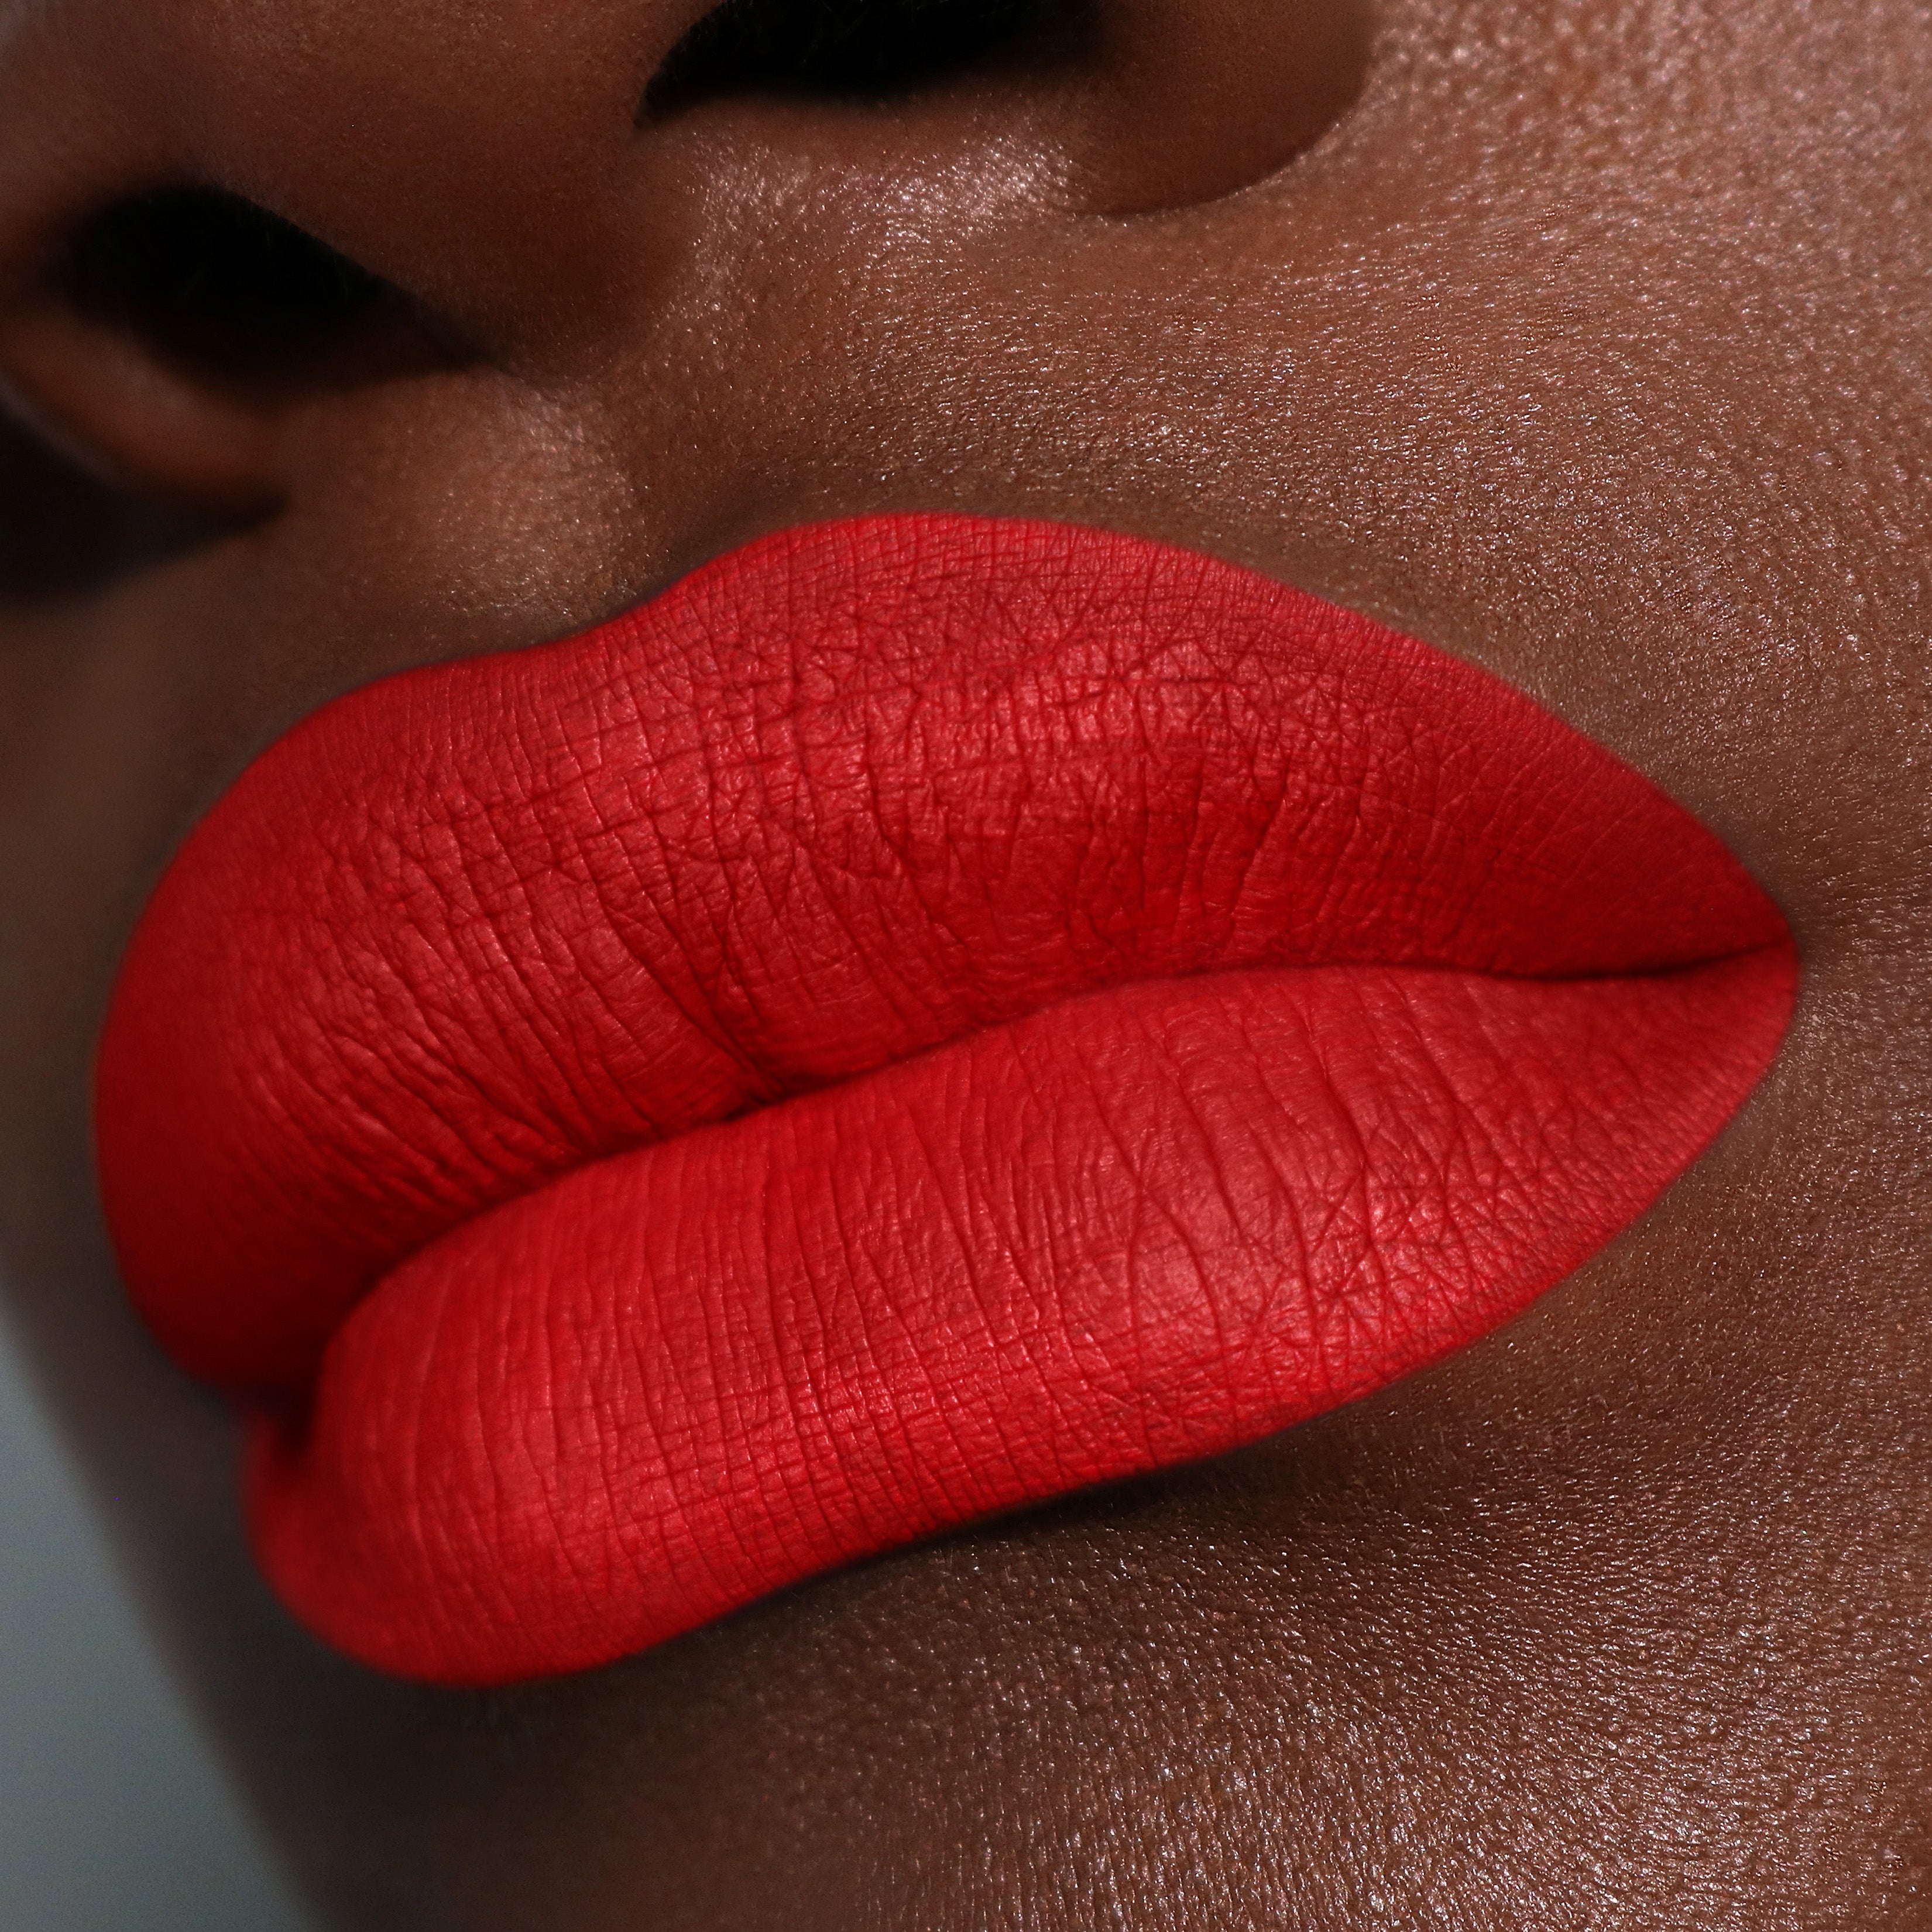 red lipstick, red matte liquid lipstick, red lip makeup, red lip swatch, red makeup, witch's brew, yvaexpressions, anime makeup